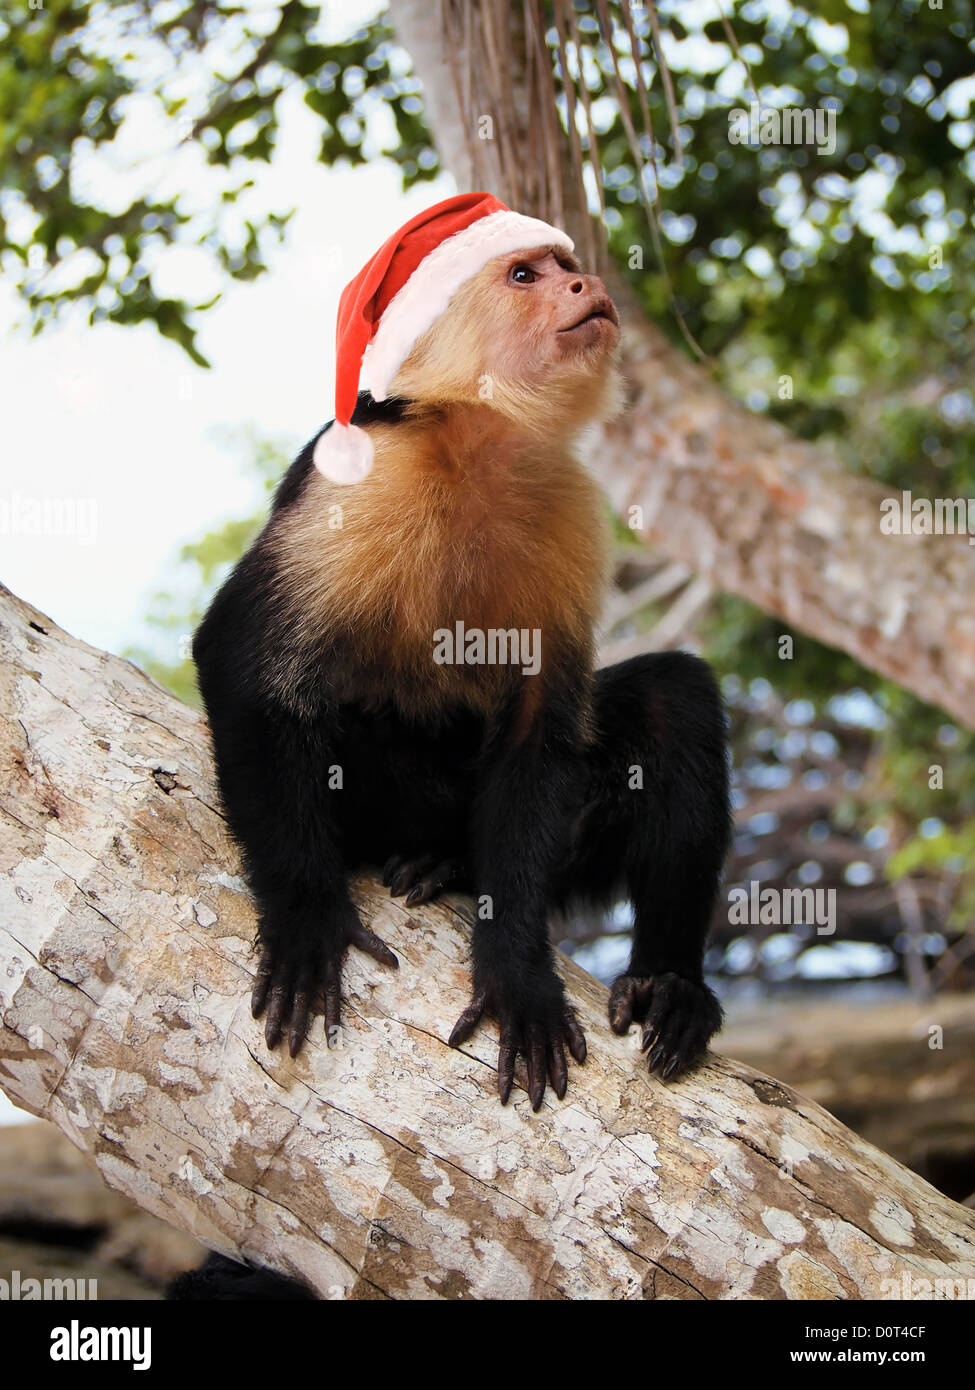 White faced Capuchin Monkey in red Santa Claus hat, Costa Rica Stock Photo